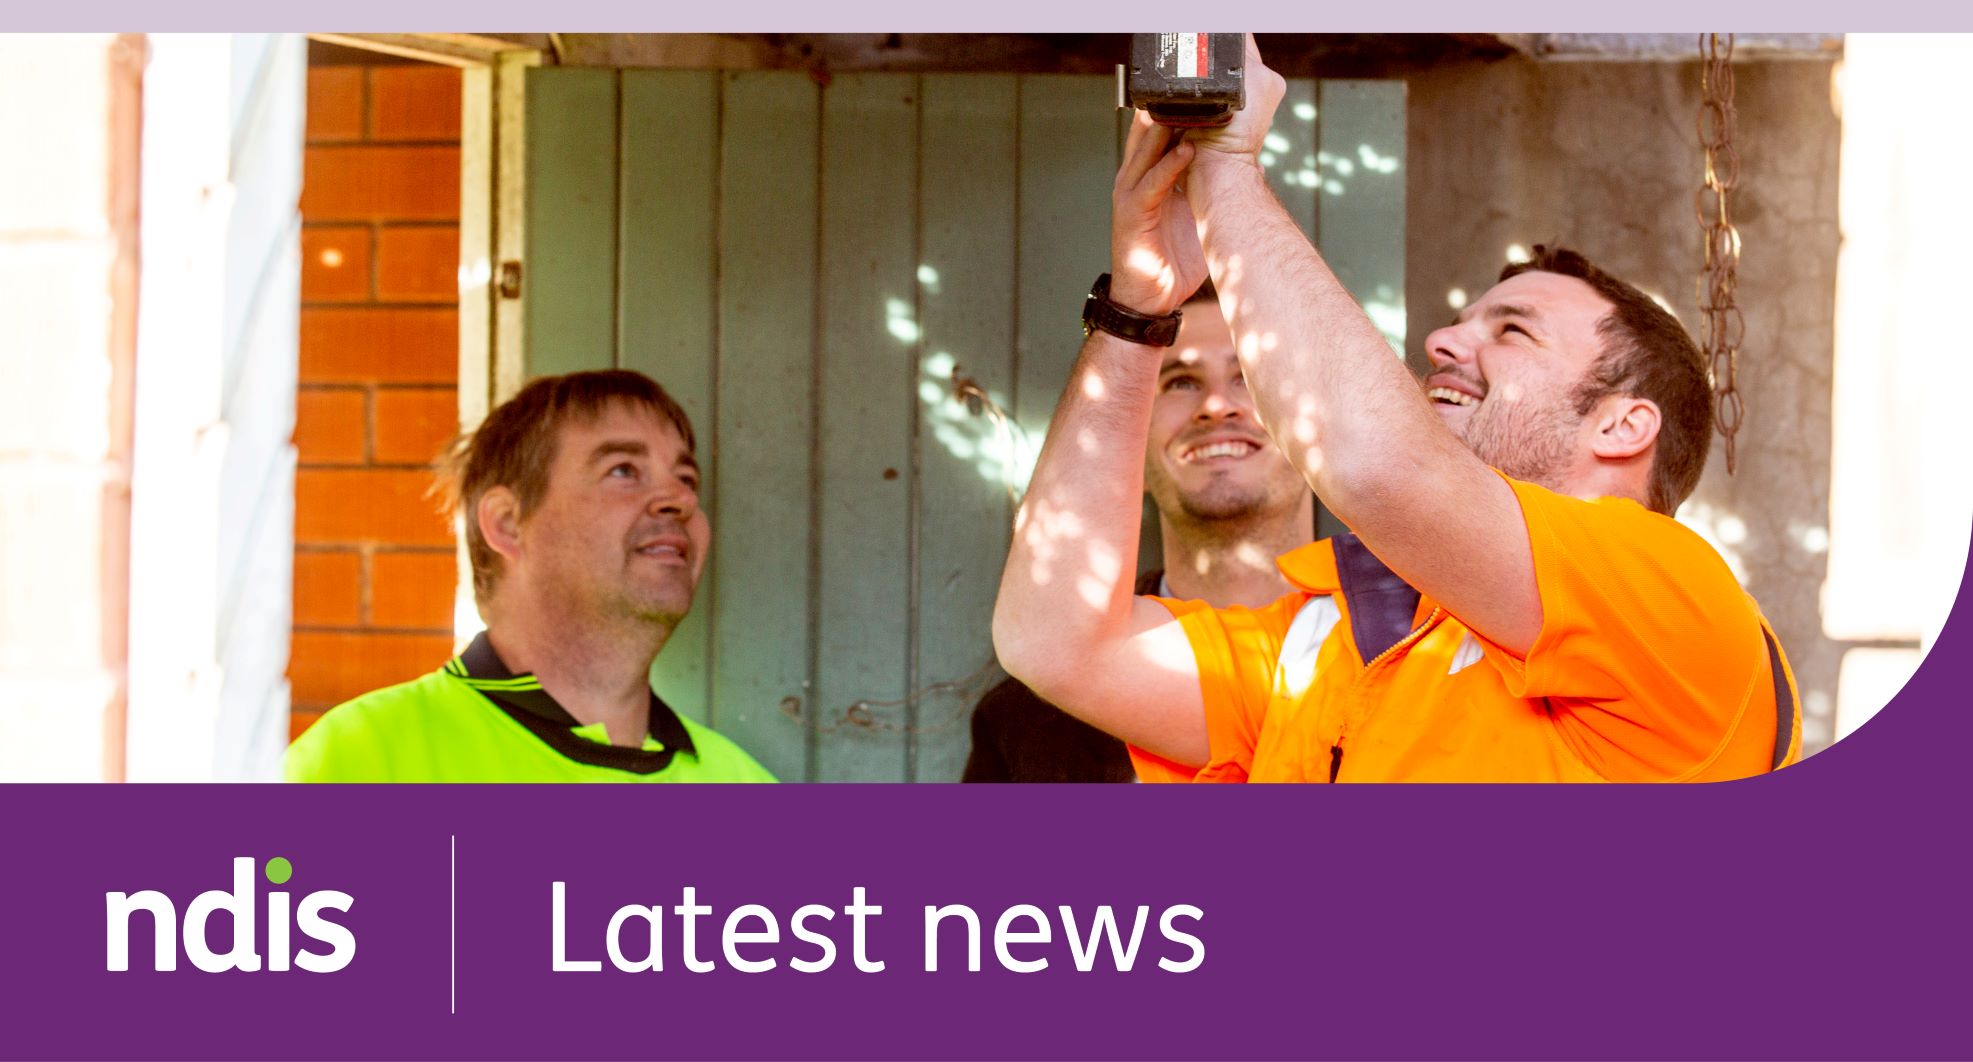 NDIS | Latest news with a picture of 3 people doing maintenance work outside, they are smiling